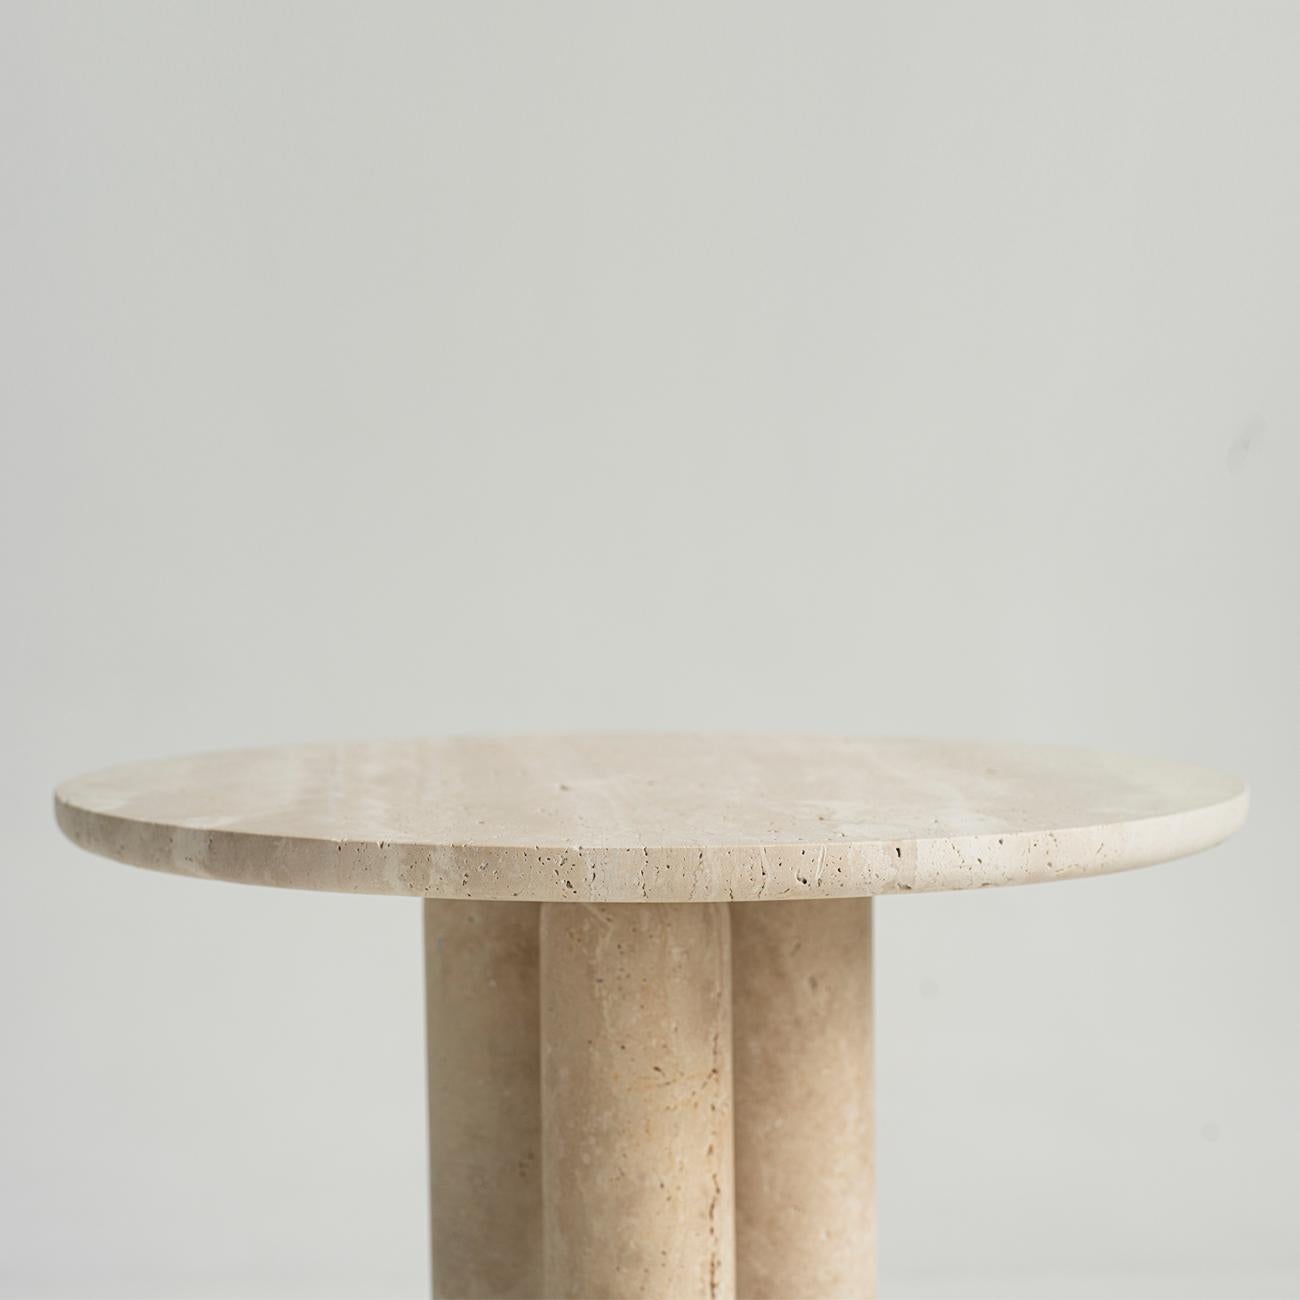 Travertine Side Table on three pieces of cylinder

Stunning, aesthetic, timeless are words that can be used to describe this elegant and modern travertine side table from Kiwano. Expertly crafted and finished by hand, our travertine side tables